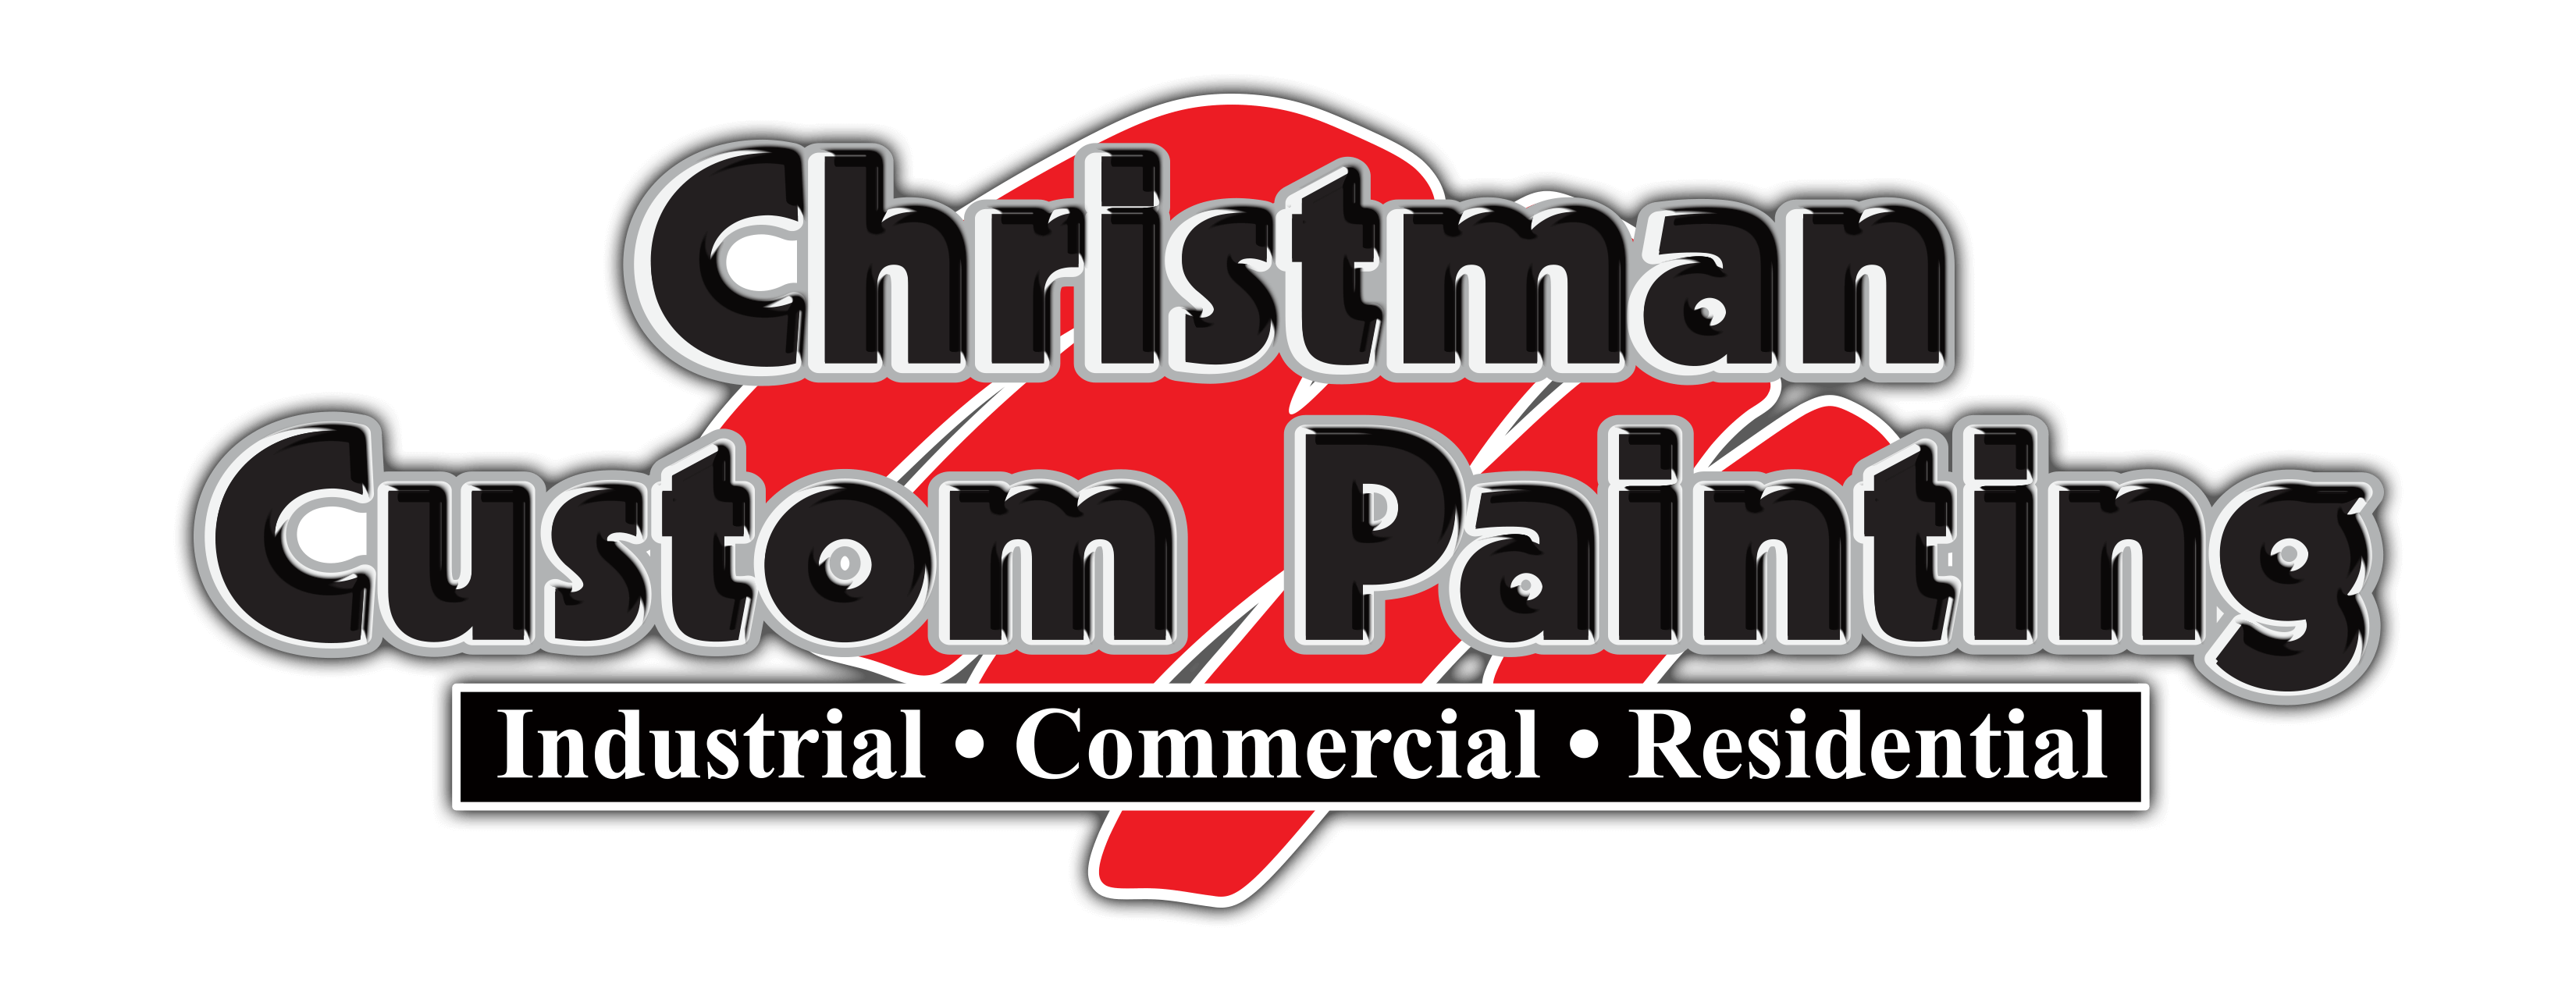 Custom Painting Logo - Christman Custom Painting | Your Home, Only Better